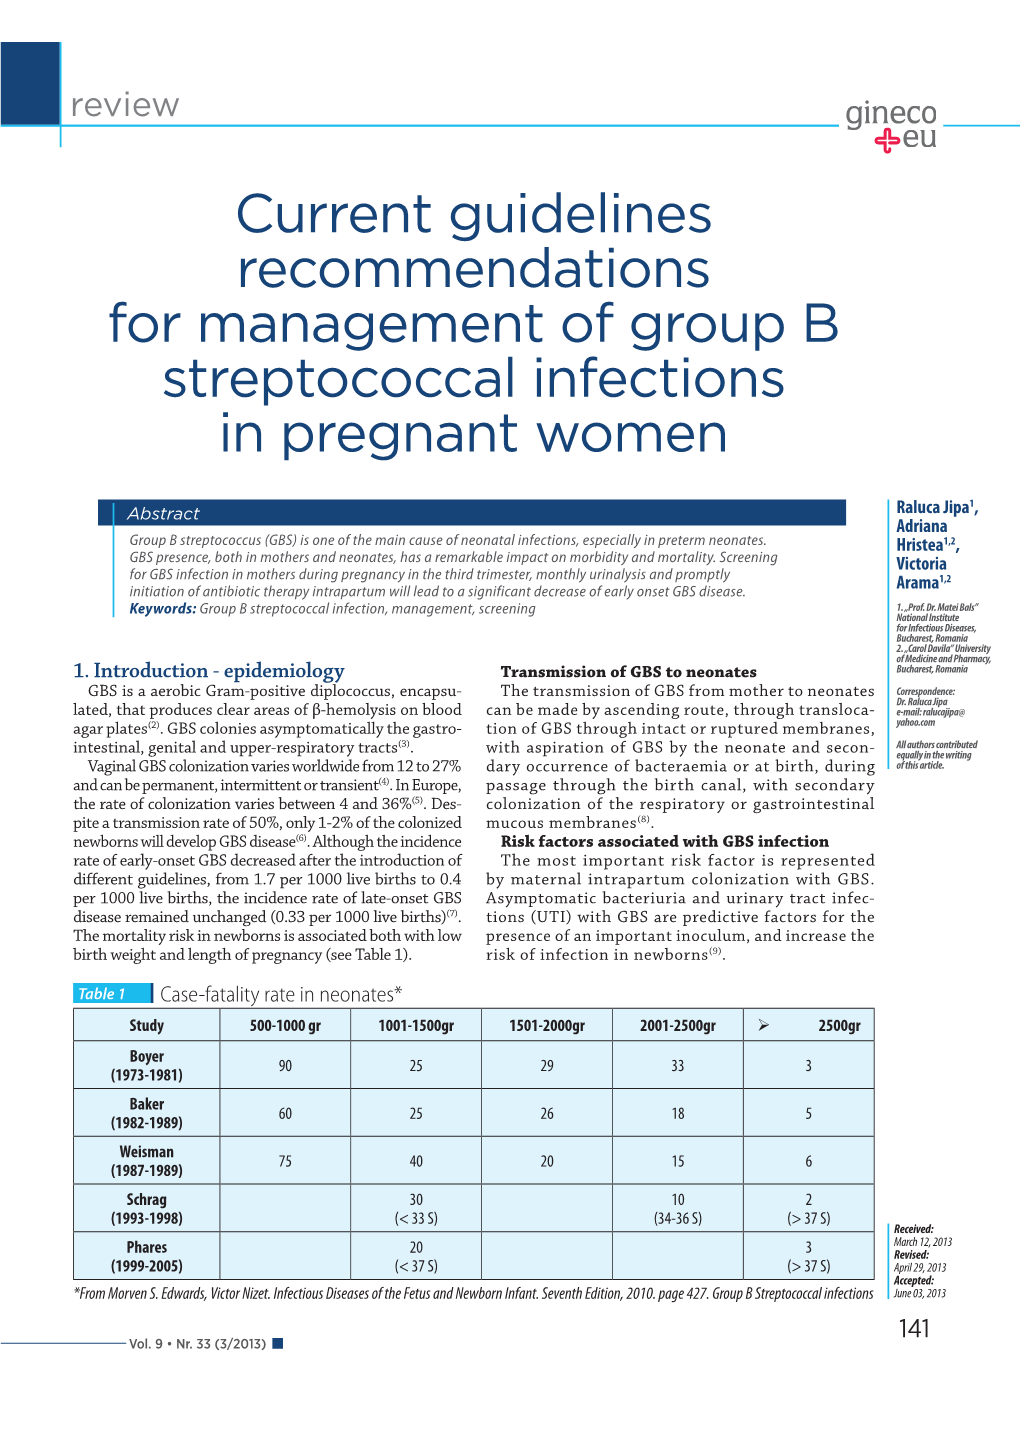 Current Guidelines Recommendations for Management of Group B Streptococcal Infections in Pregnant Women